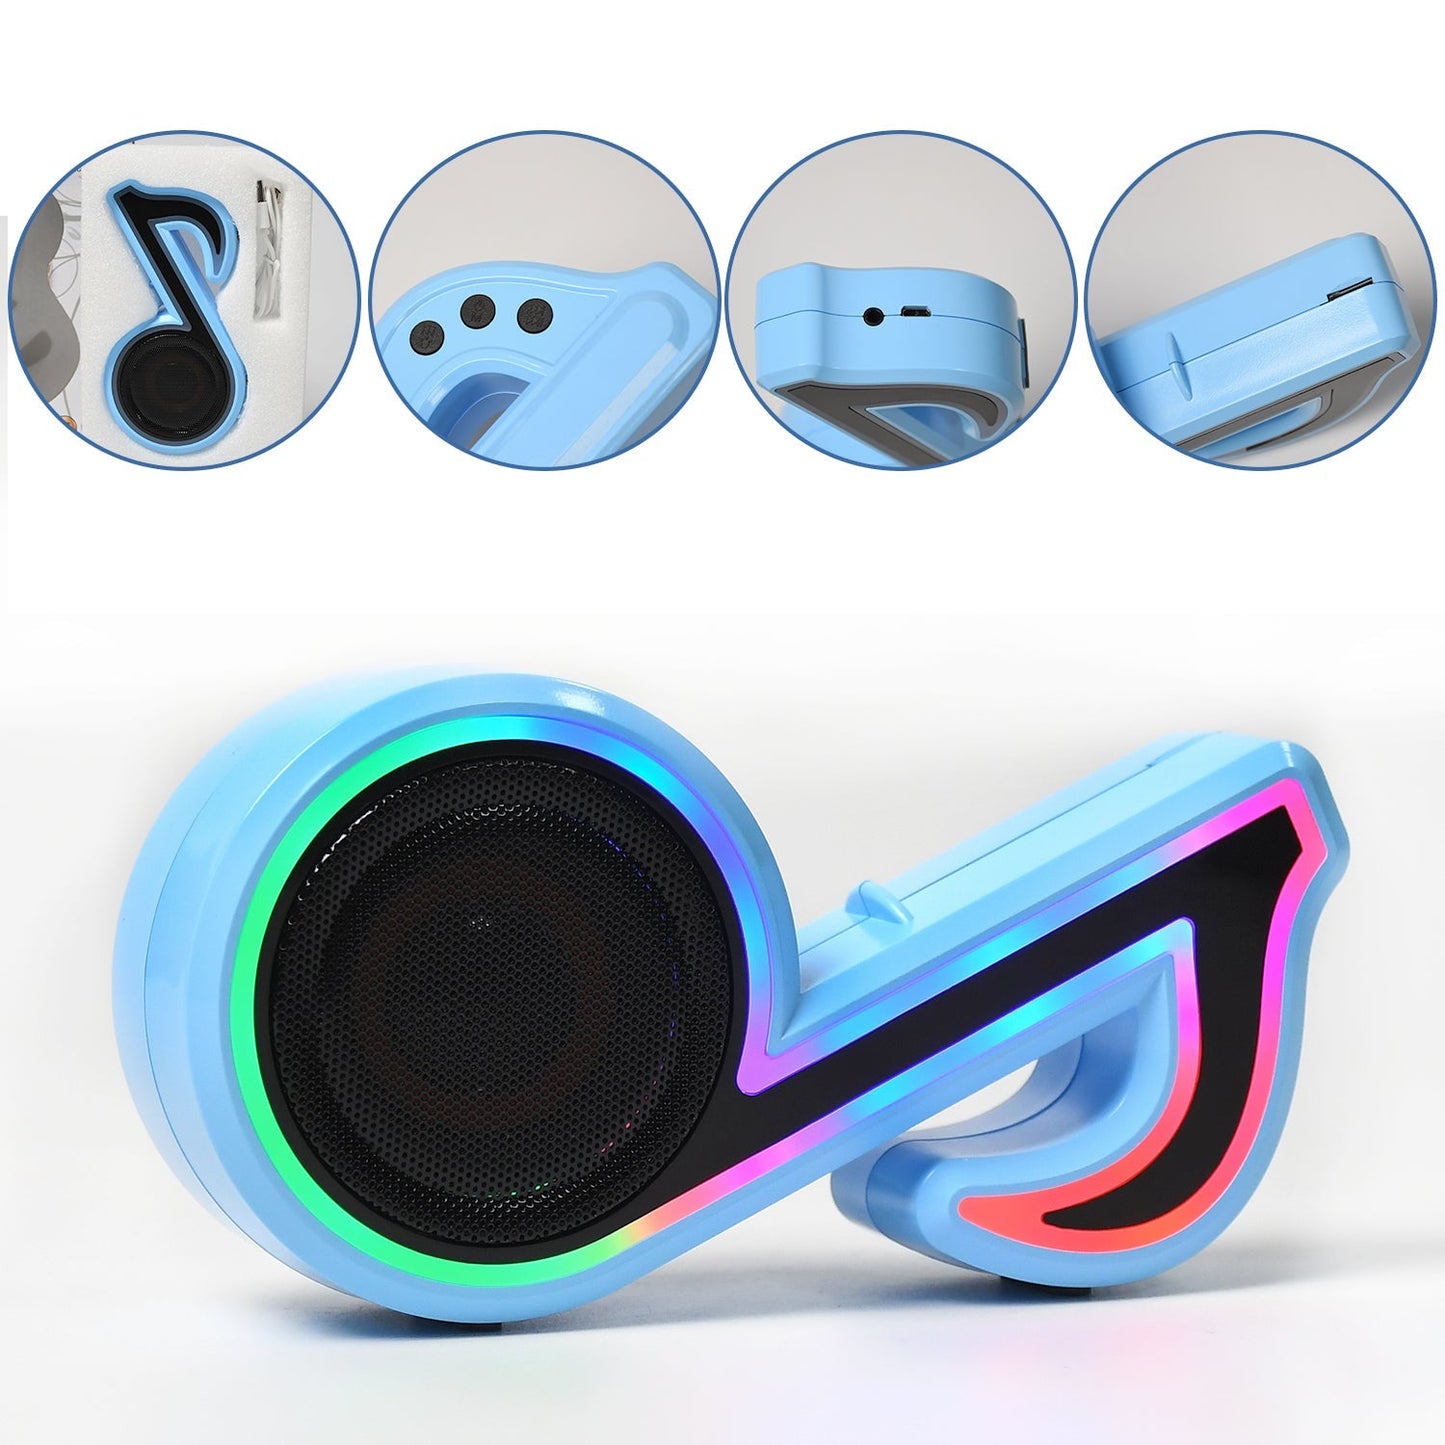 Mini Portable Music Note Shape Speaker Subwoofer Colorful Musical Note LED Lighting Sound For Creatives Gift Computer Phone Sound Equipment blootuth speaker (Media Player)